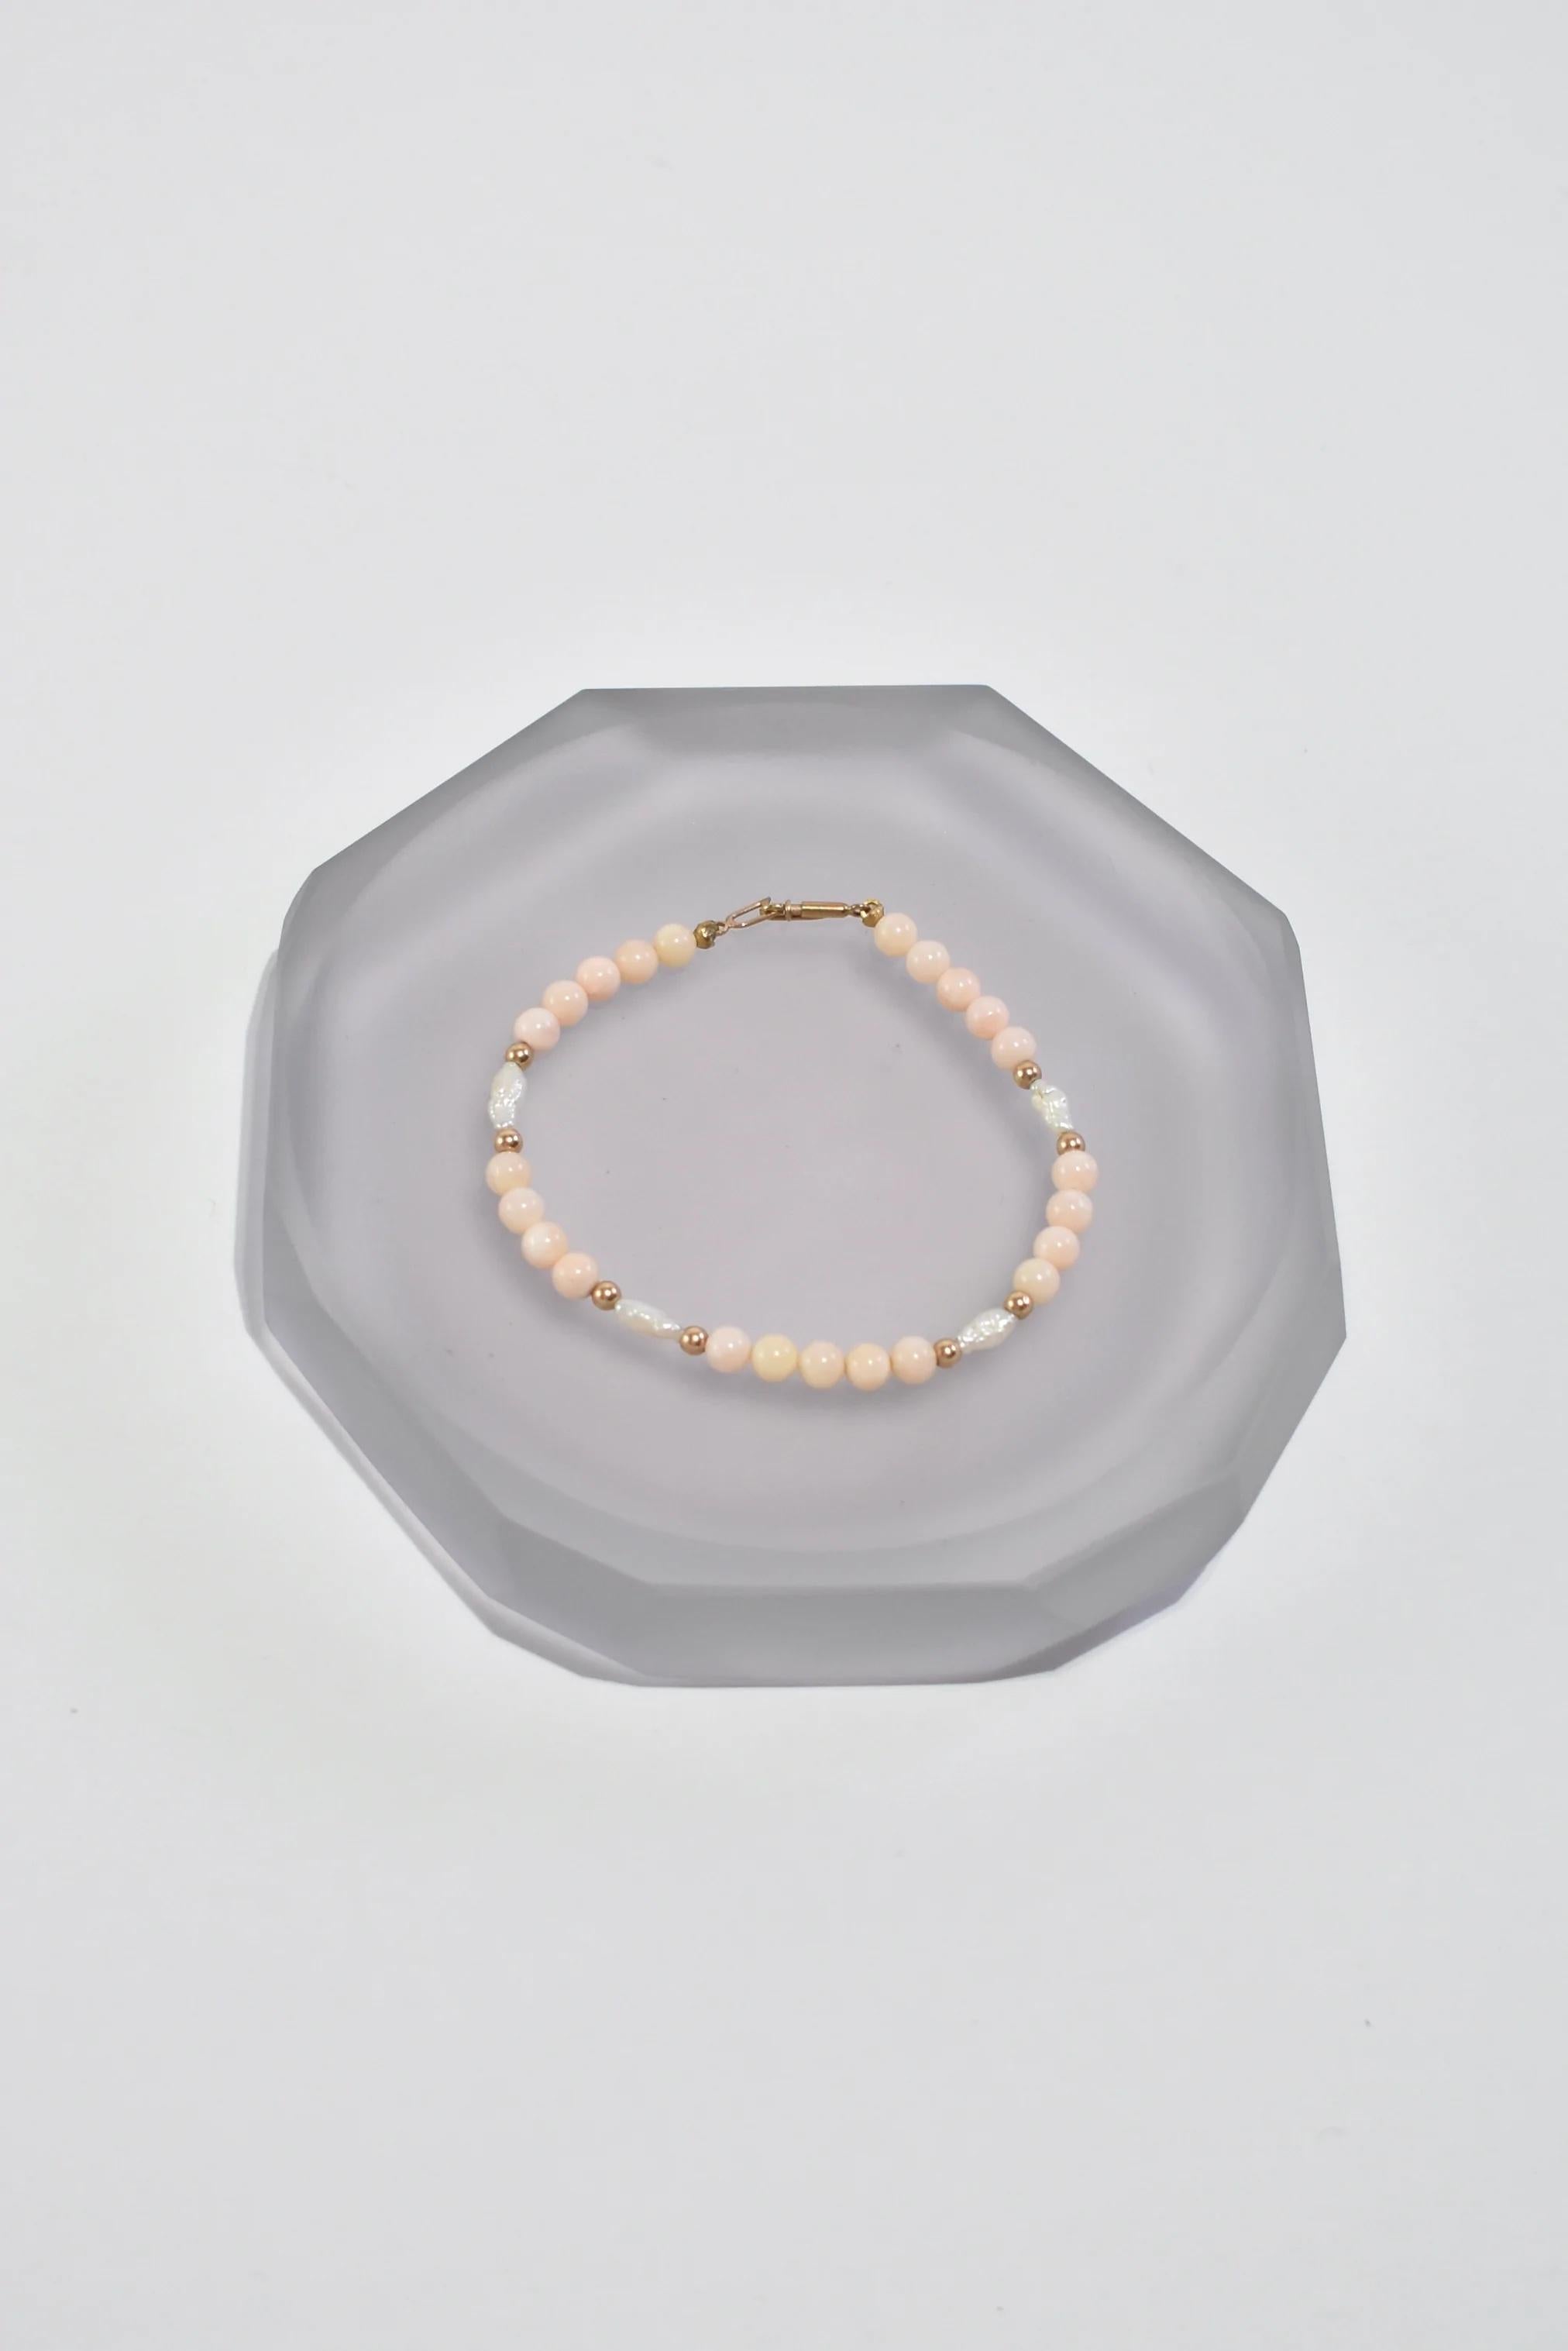 Vintage light pink coral bracelet with freshwater pearl and gold detail, clasp closure. Stamped 14k.

Material: 14k gold, coral, pearl.